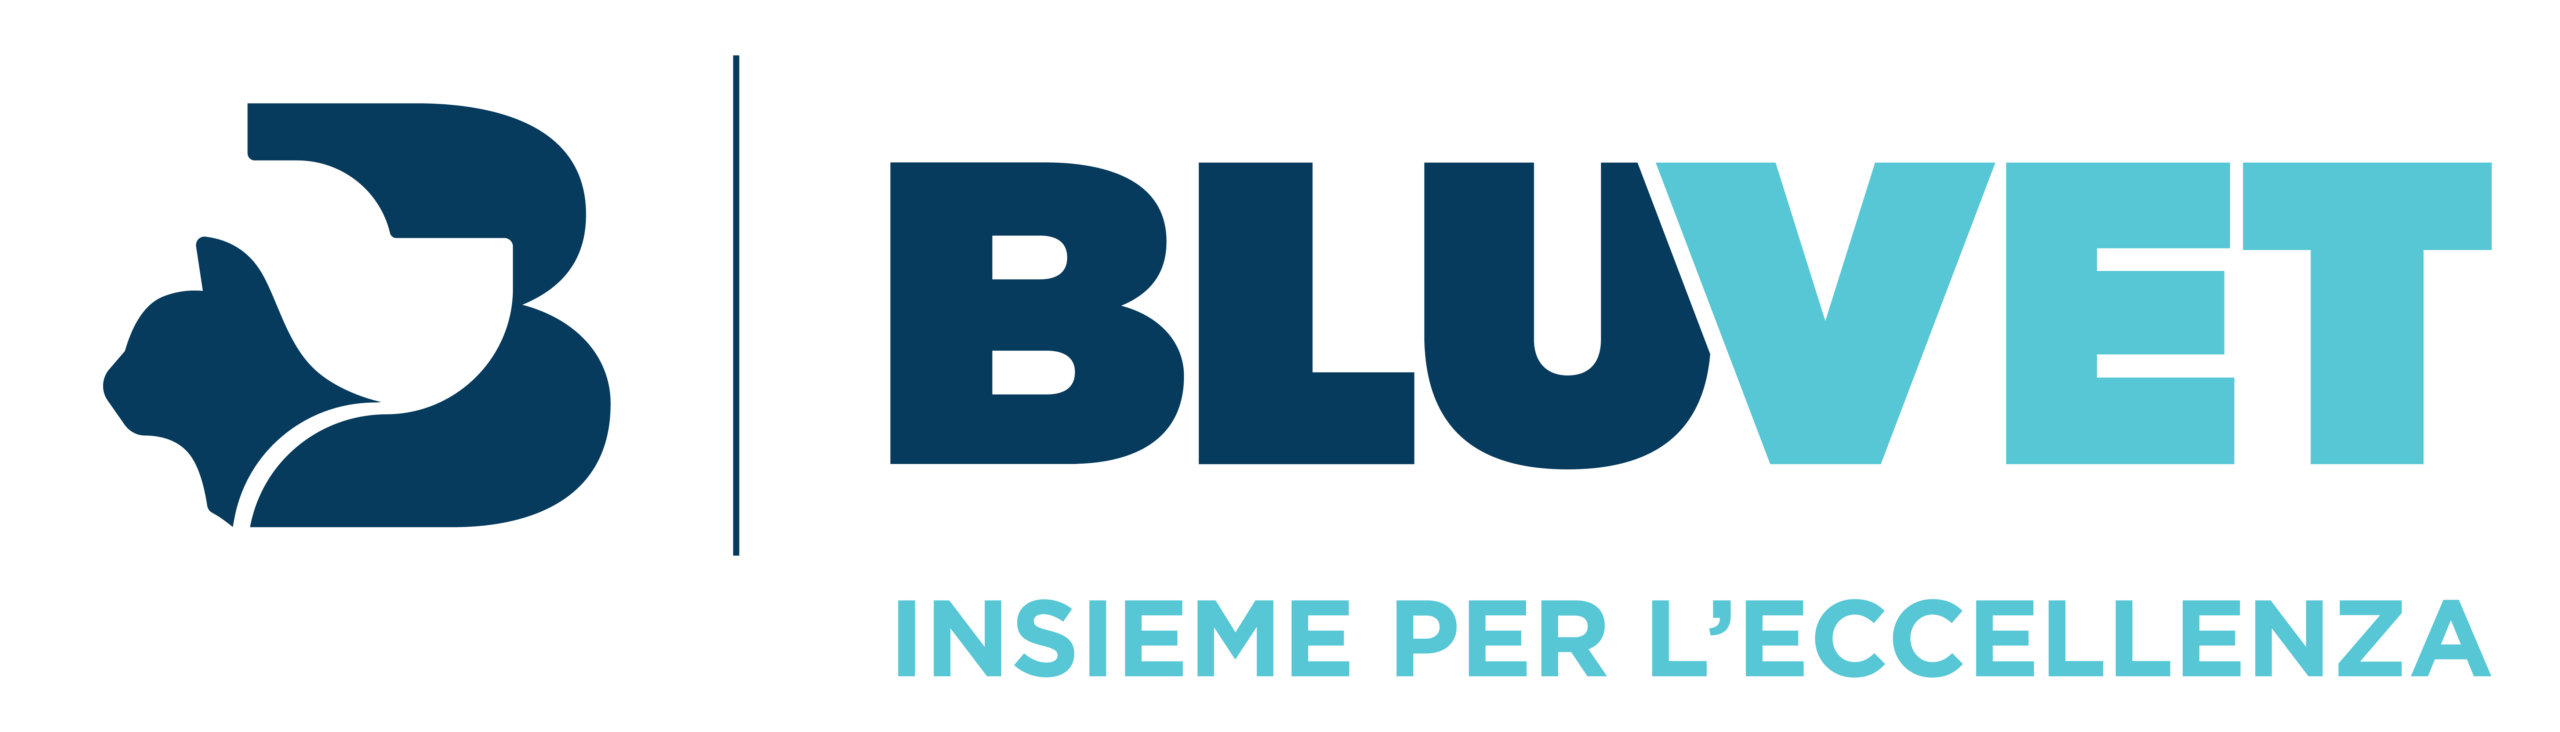 cropped Logo BV Insieme per leccelenza scaled 1.png